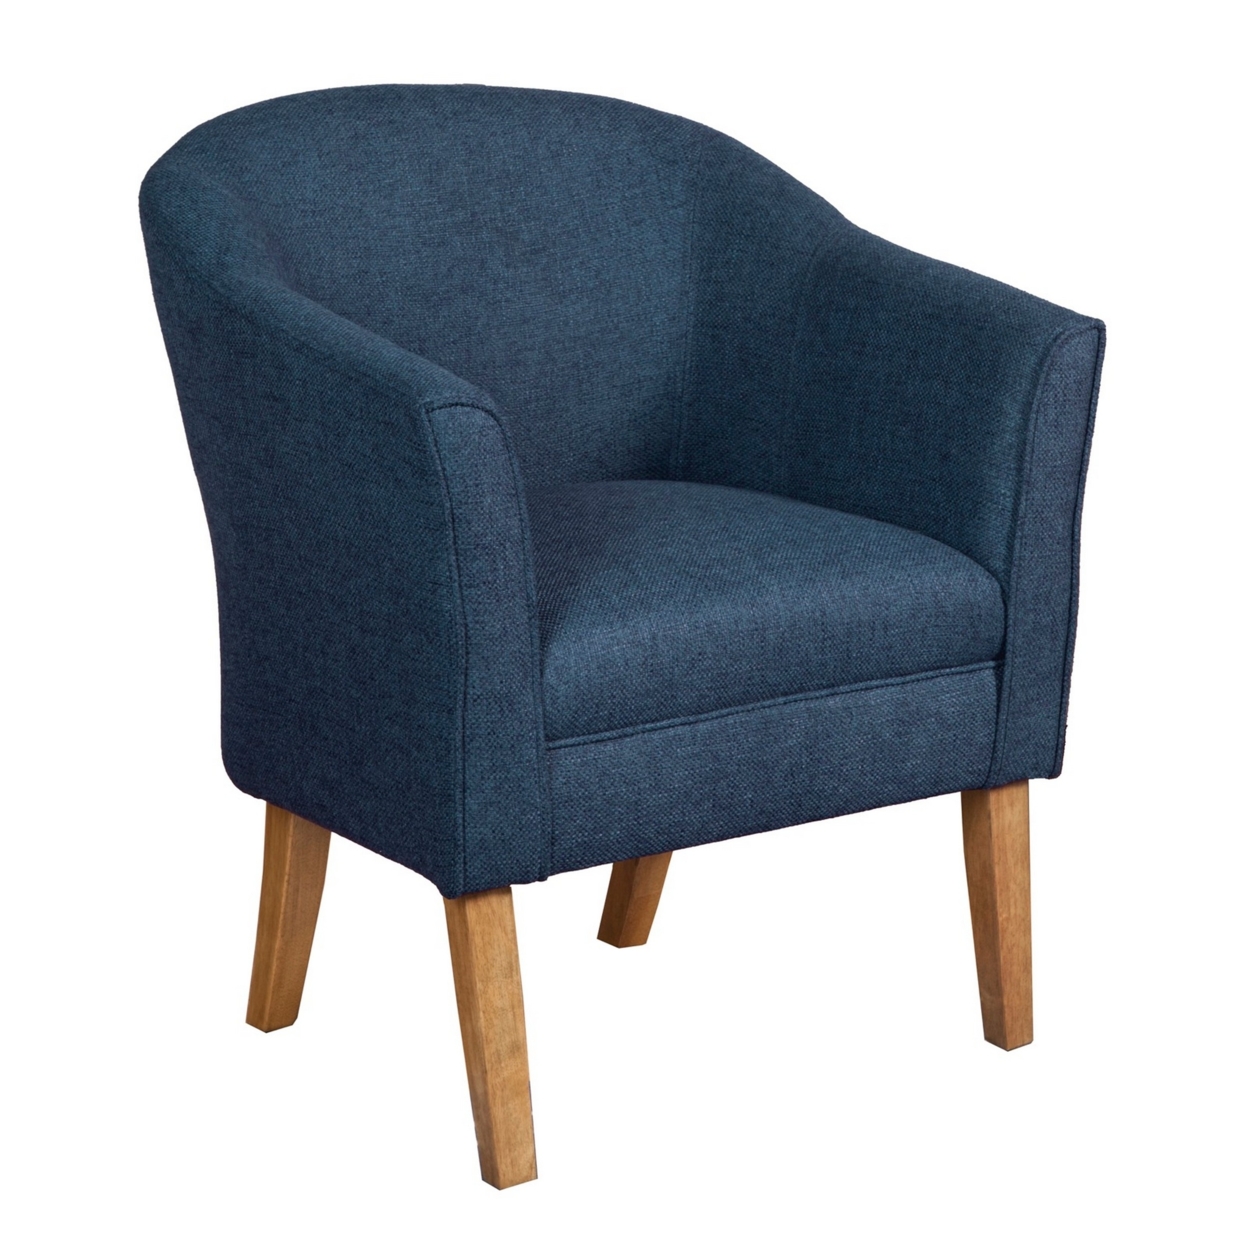 Fabric Upholstered Wooden Accent Chair With Curved Back, Blue And Brown- Saltoro Sherpi